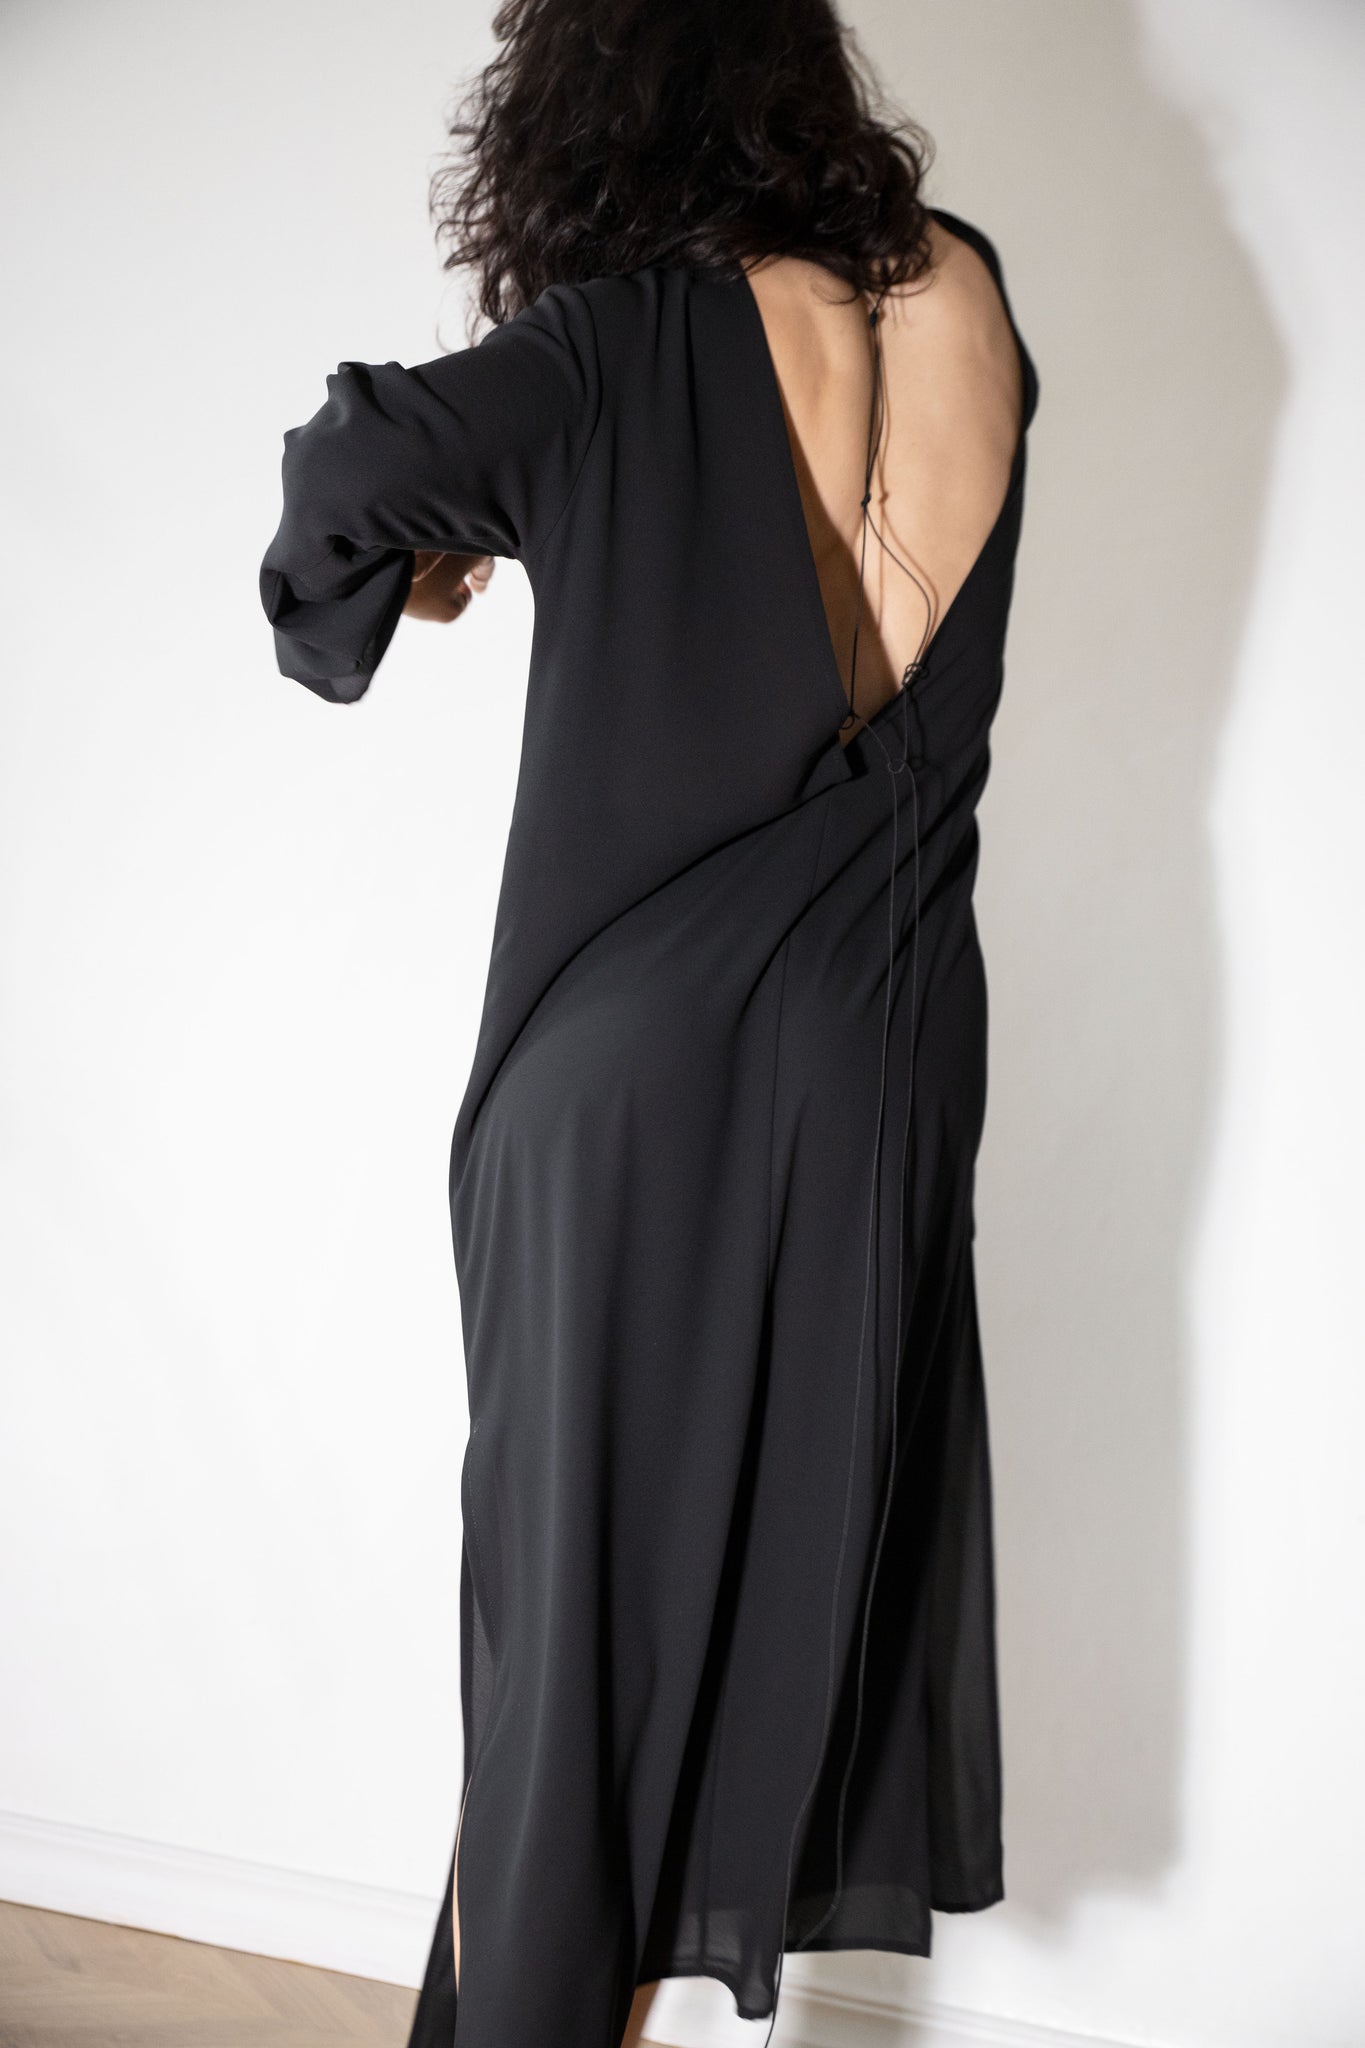 Open back dress with sleeves